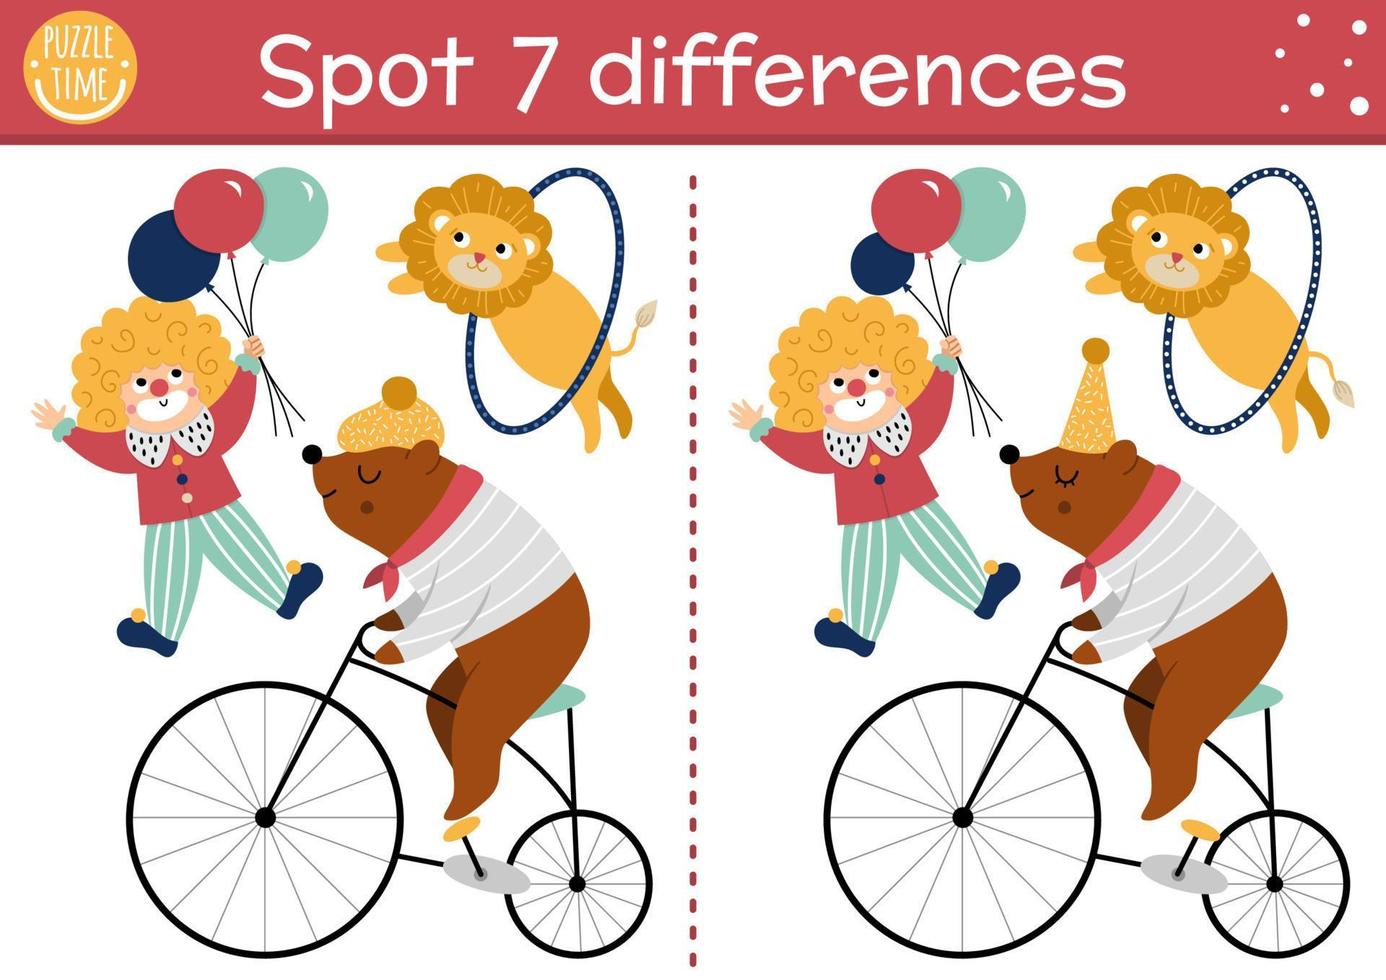 Circus find differences game for children. Educational activity with bear on bike, clown, lion. Amusement show puzzle for kids with funny animal artists. Festival printable worksheet or page vector